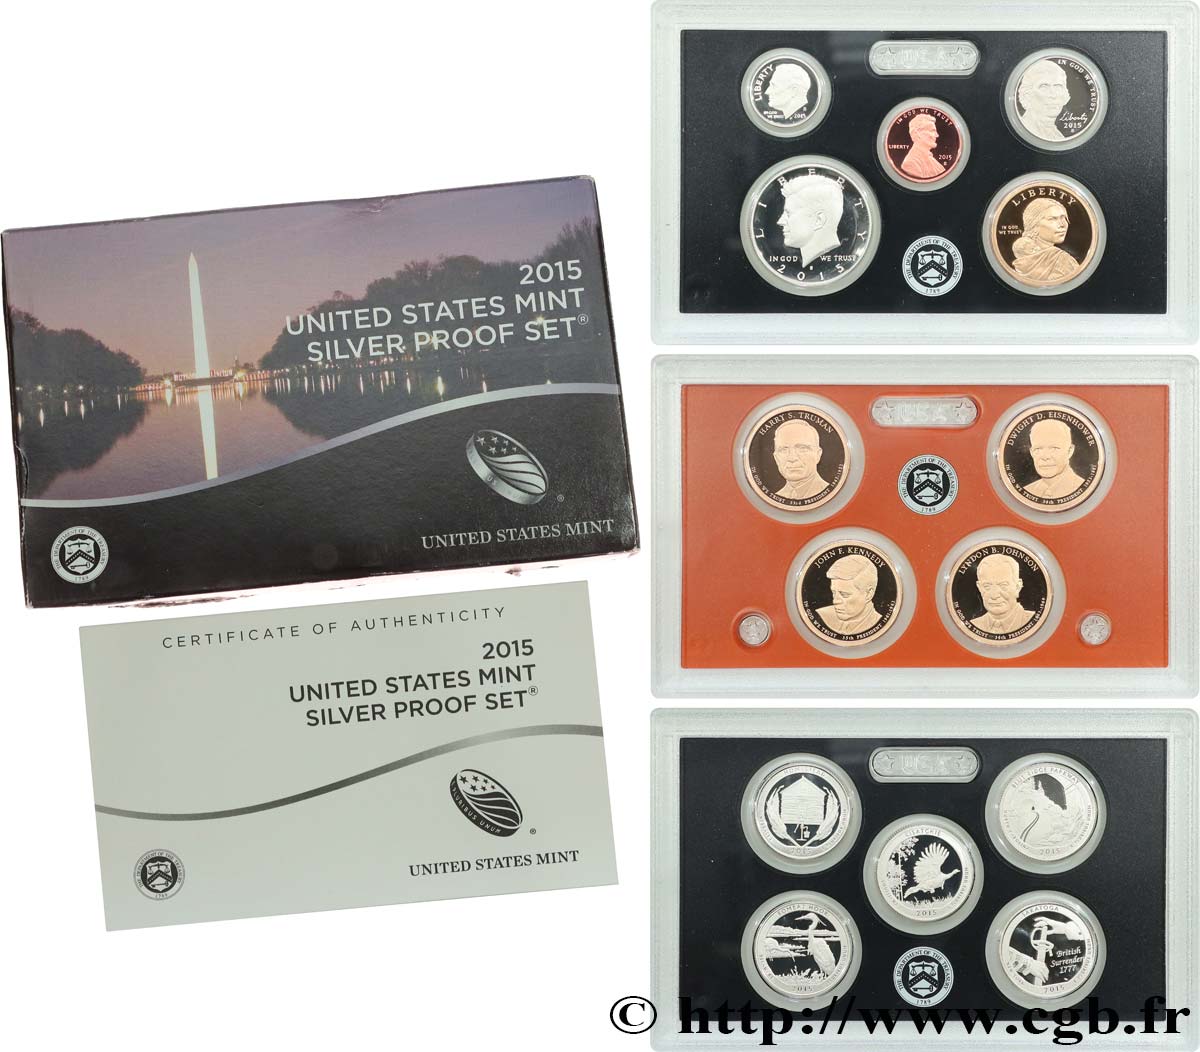 UNITED STATES OF AMERICA SILVER PROOF SET - 14 monnaies 2015 S- San Francisco MS 